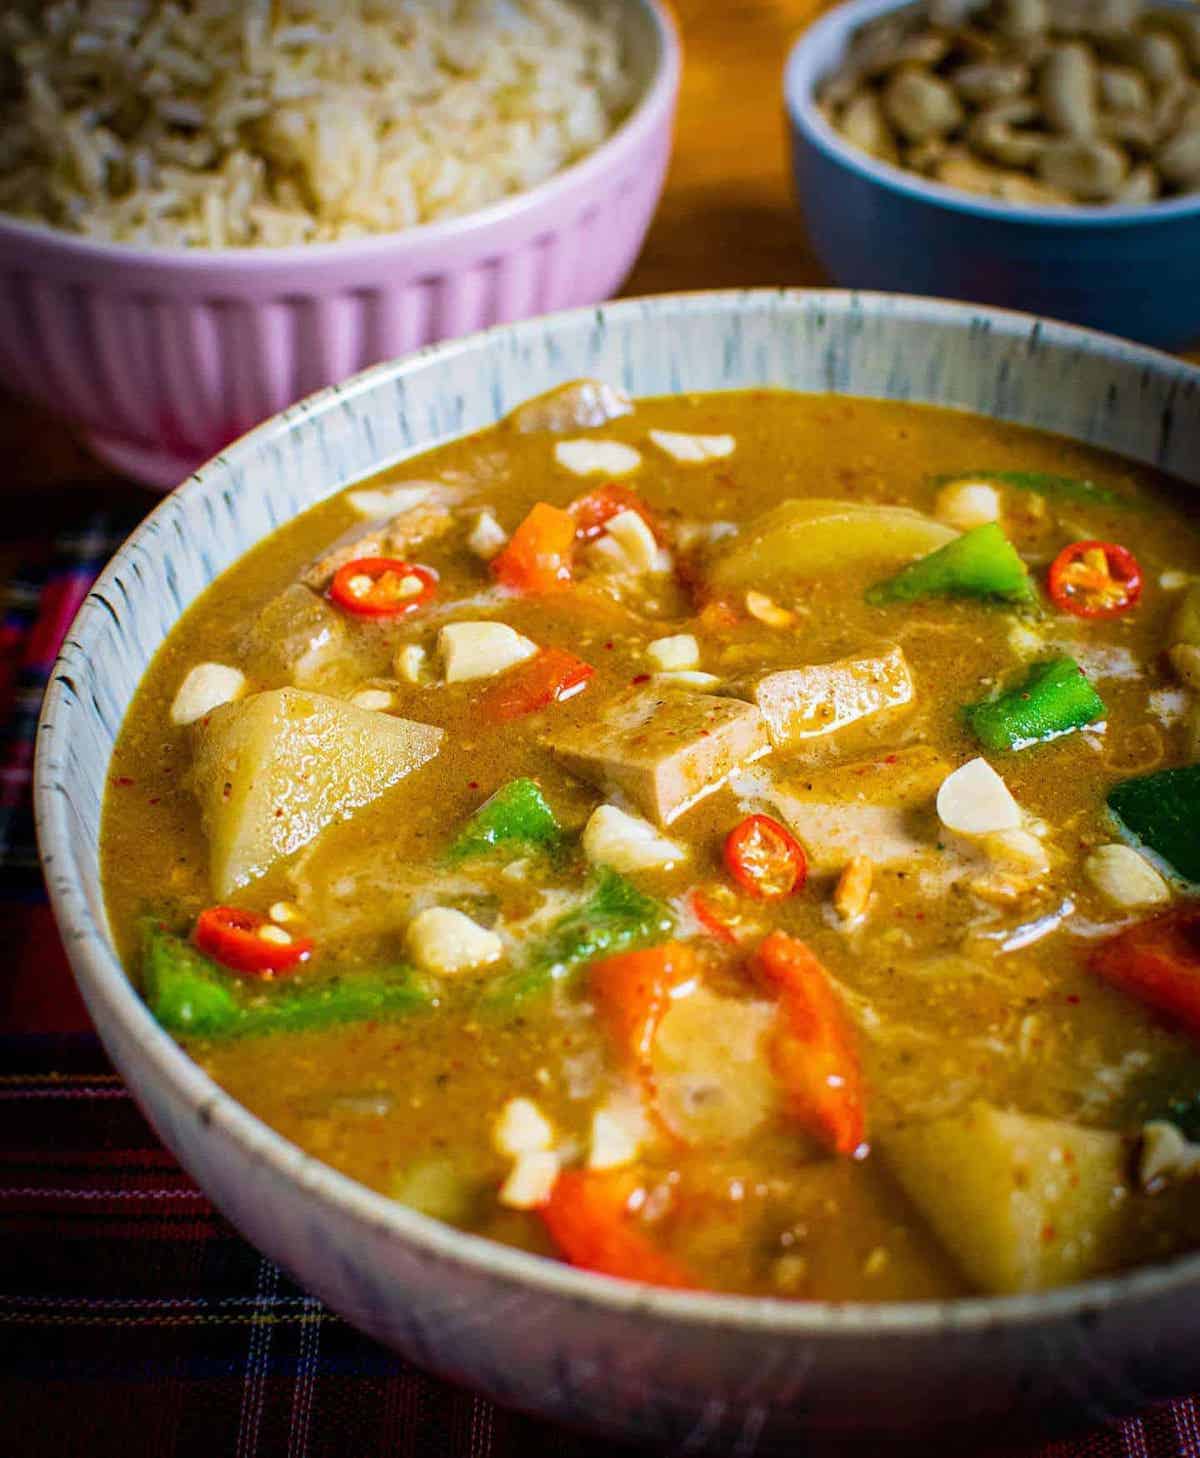 Close-up of a bowl of Thai Massaman curry.